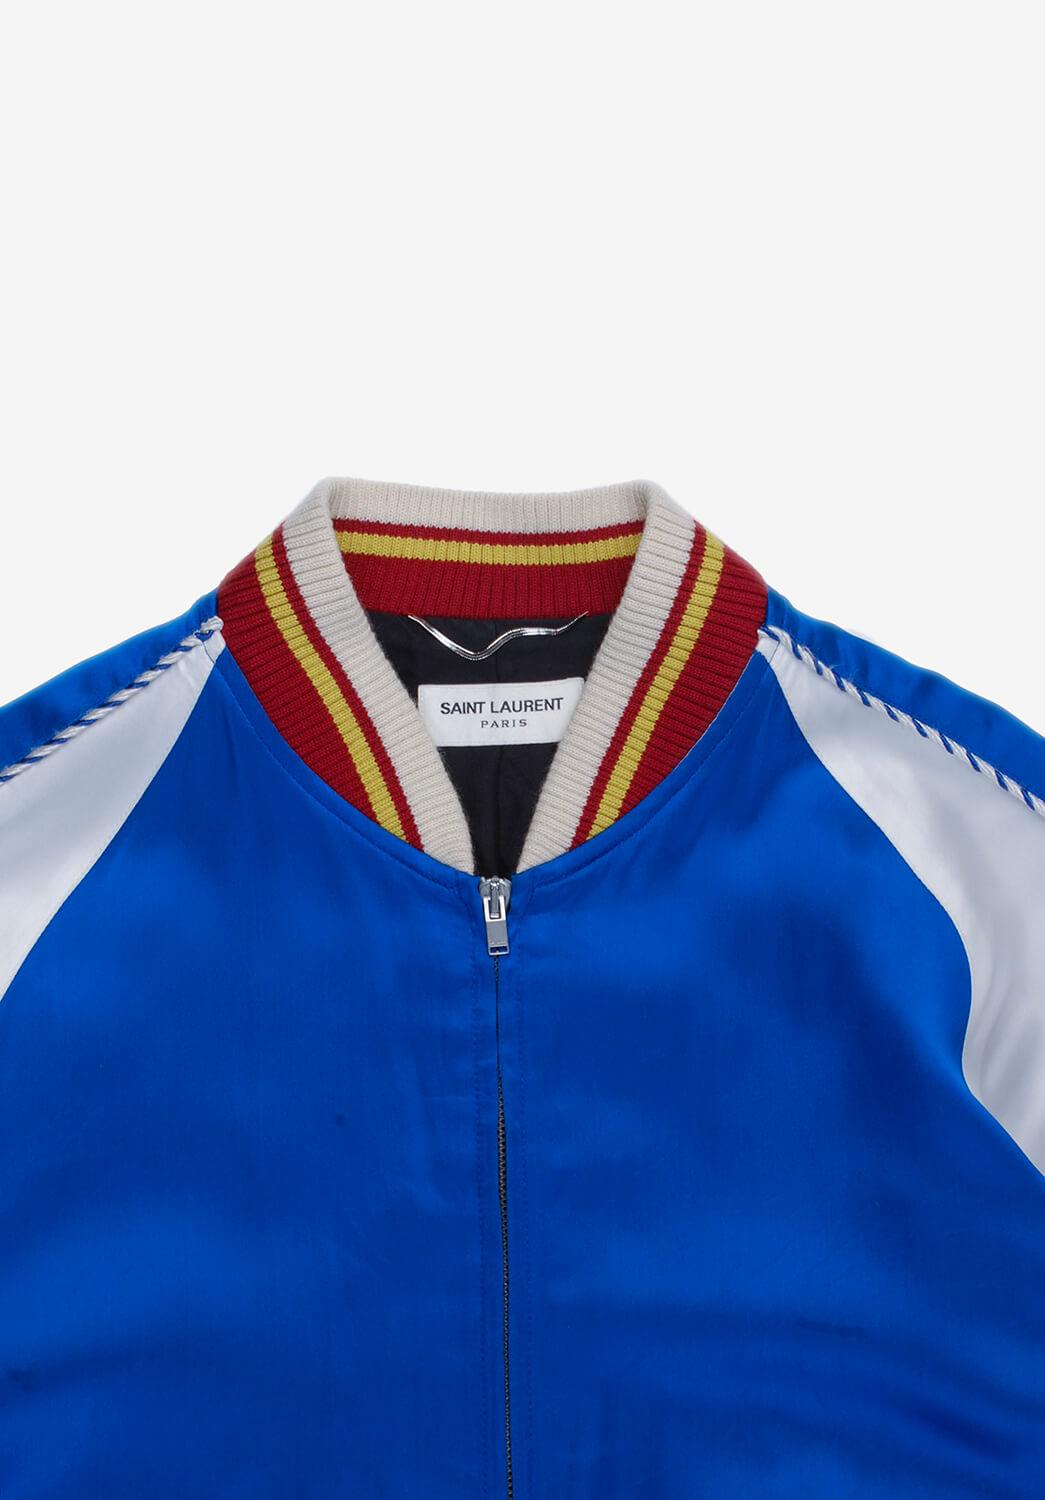 Item for sale is 100% genuine Saint Laurent Men Bomber Jacket 
Color: Blue/White
(An actual color may a bit vary due to individual computer screen interpretation)
Material: 100% viscose, lining - 100% silk
Tag size: 50IT(M)
This jacket is great